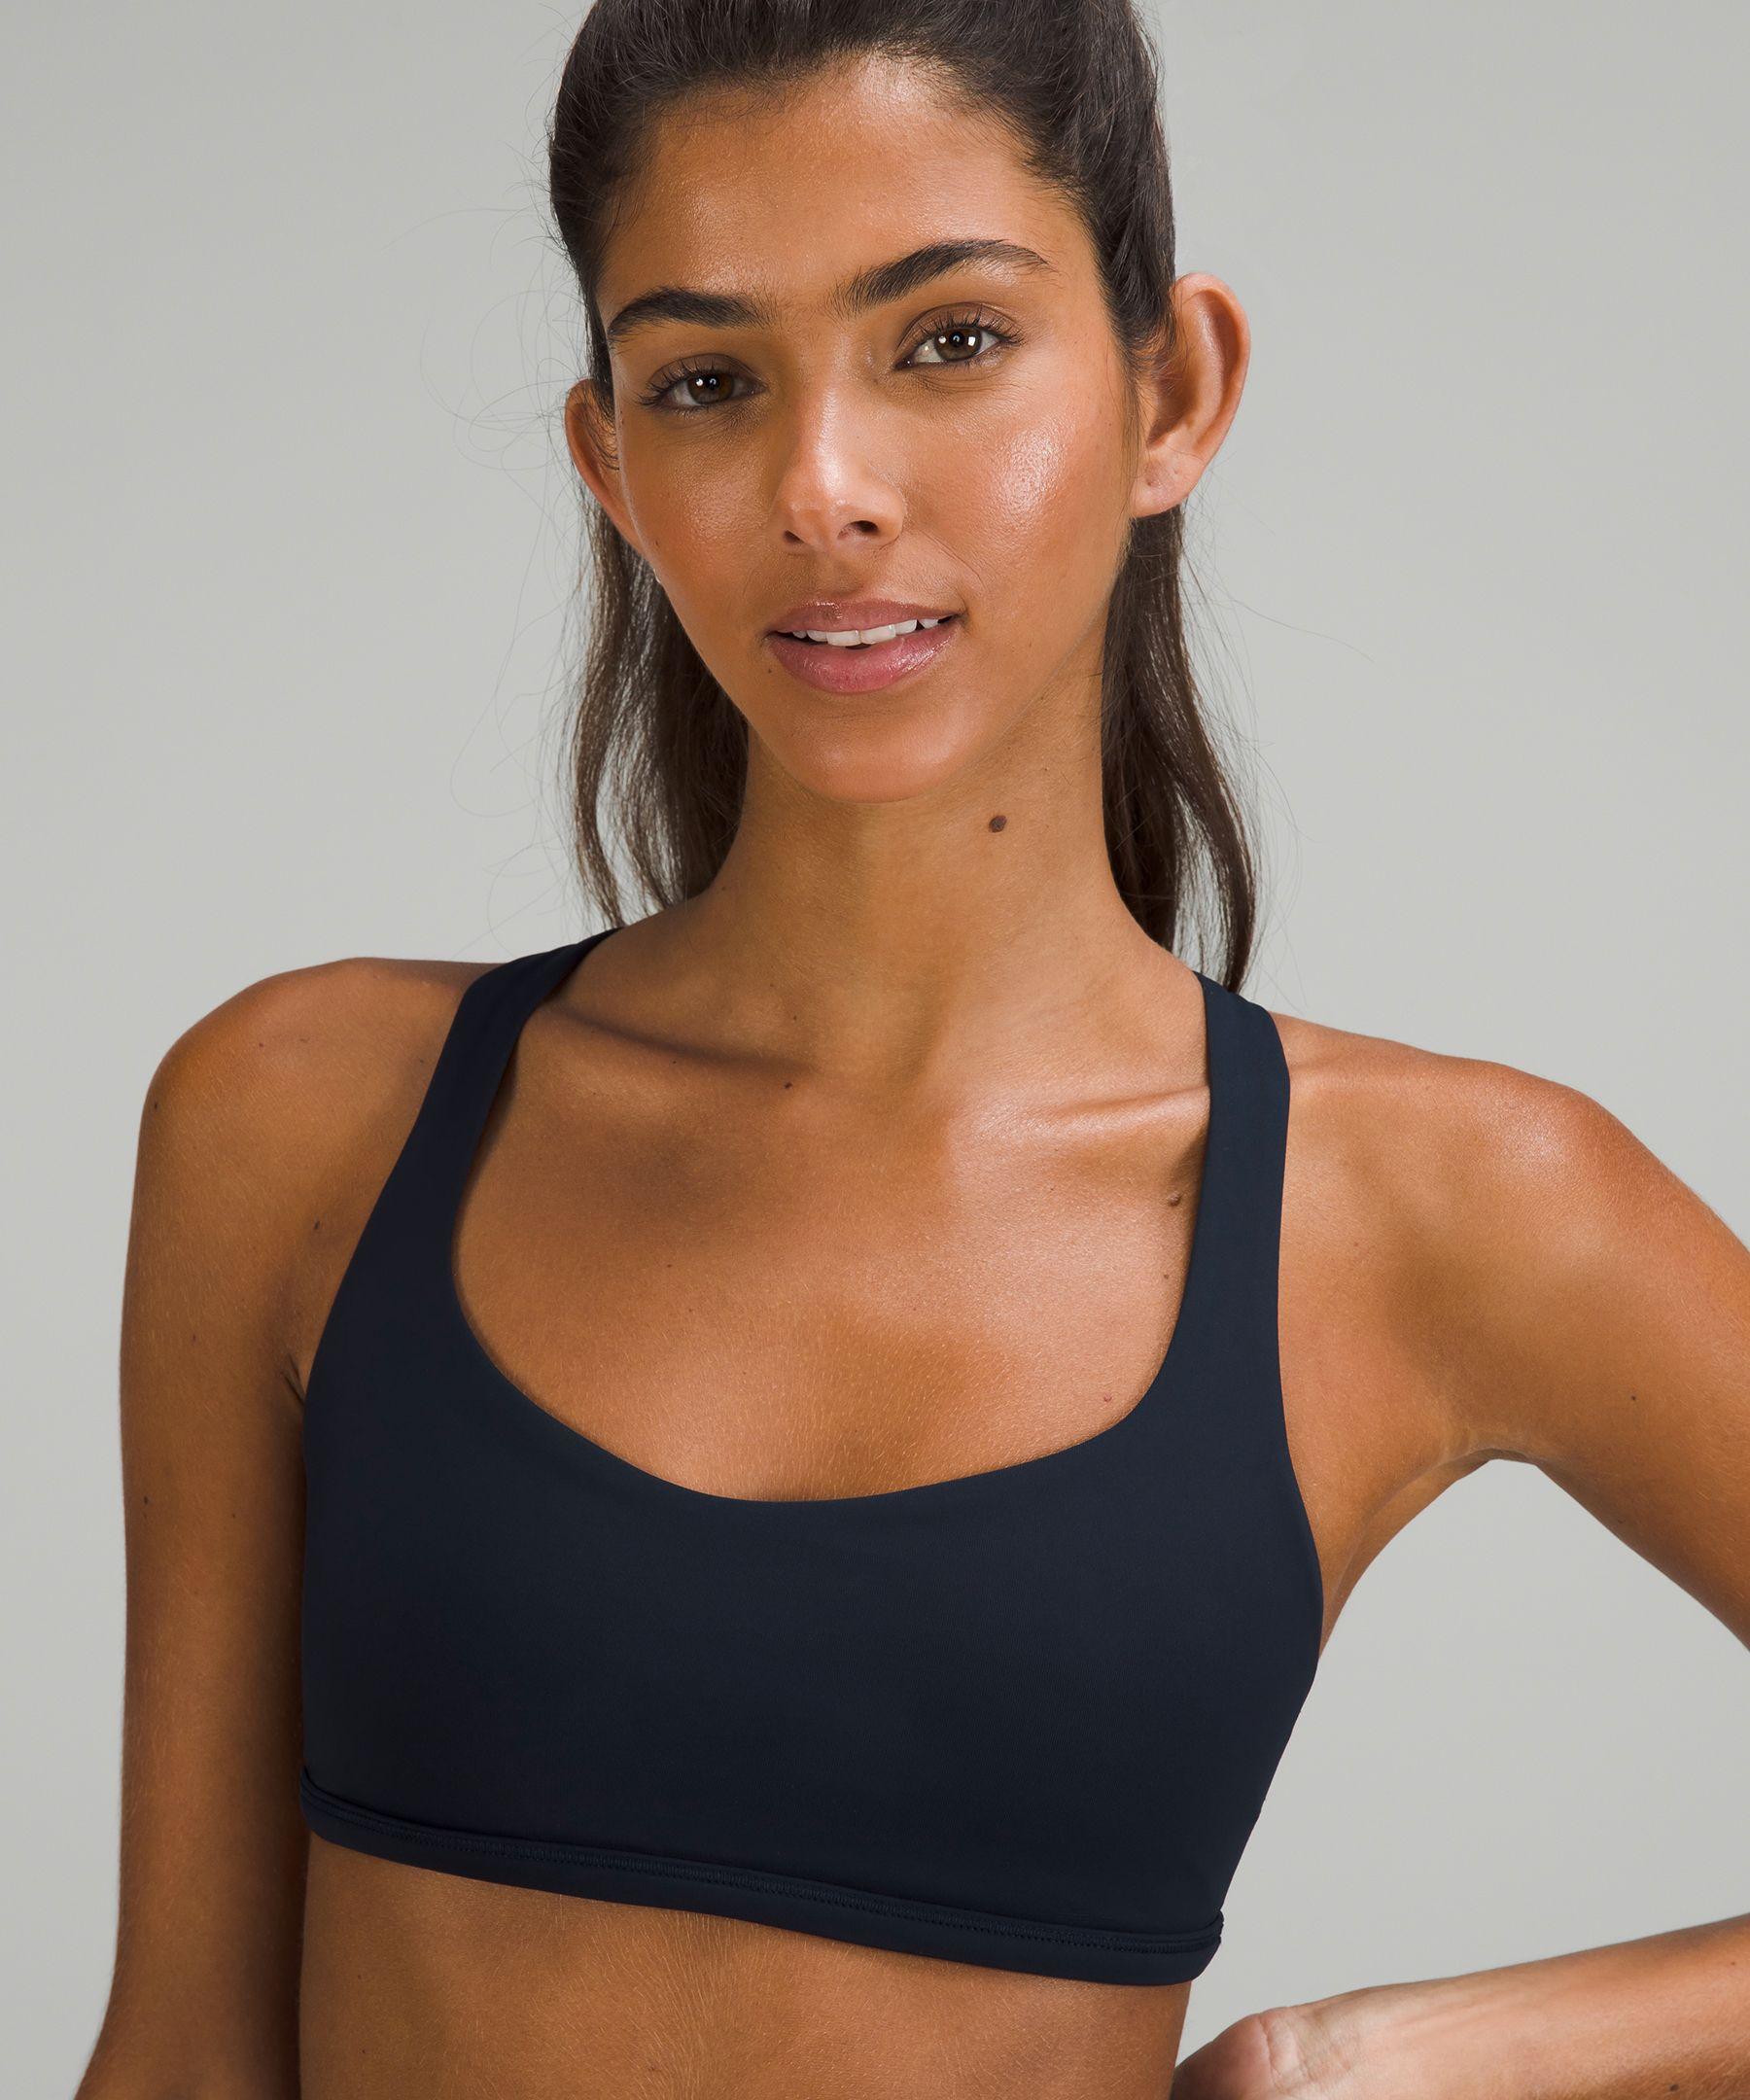 lululemon athletica Free To Be Bra - Wild Light Support, A/b Cup in Blue